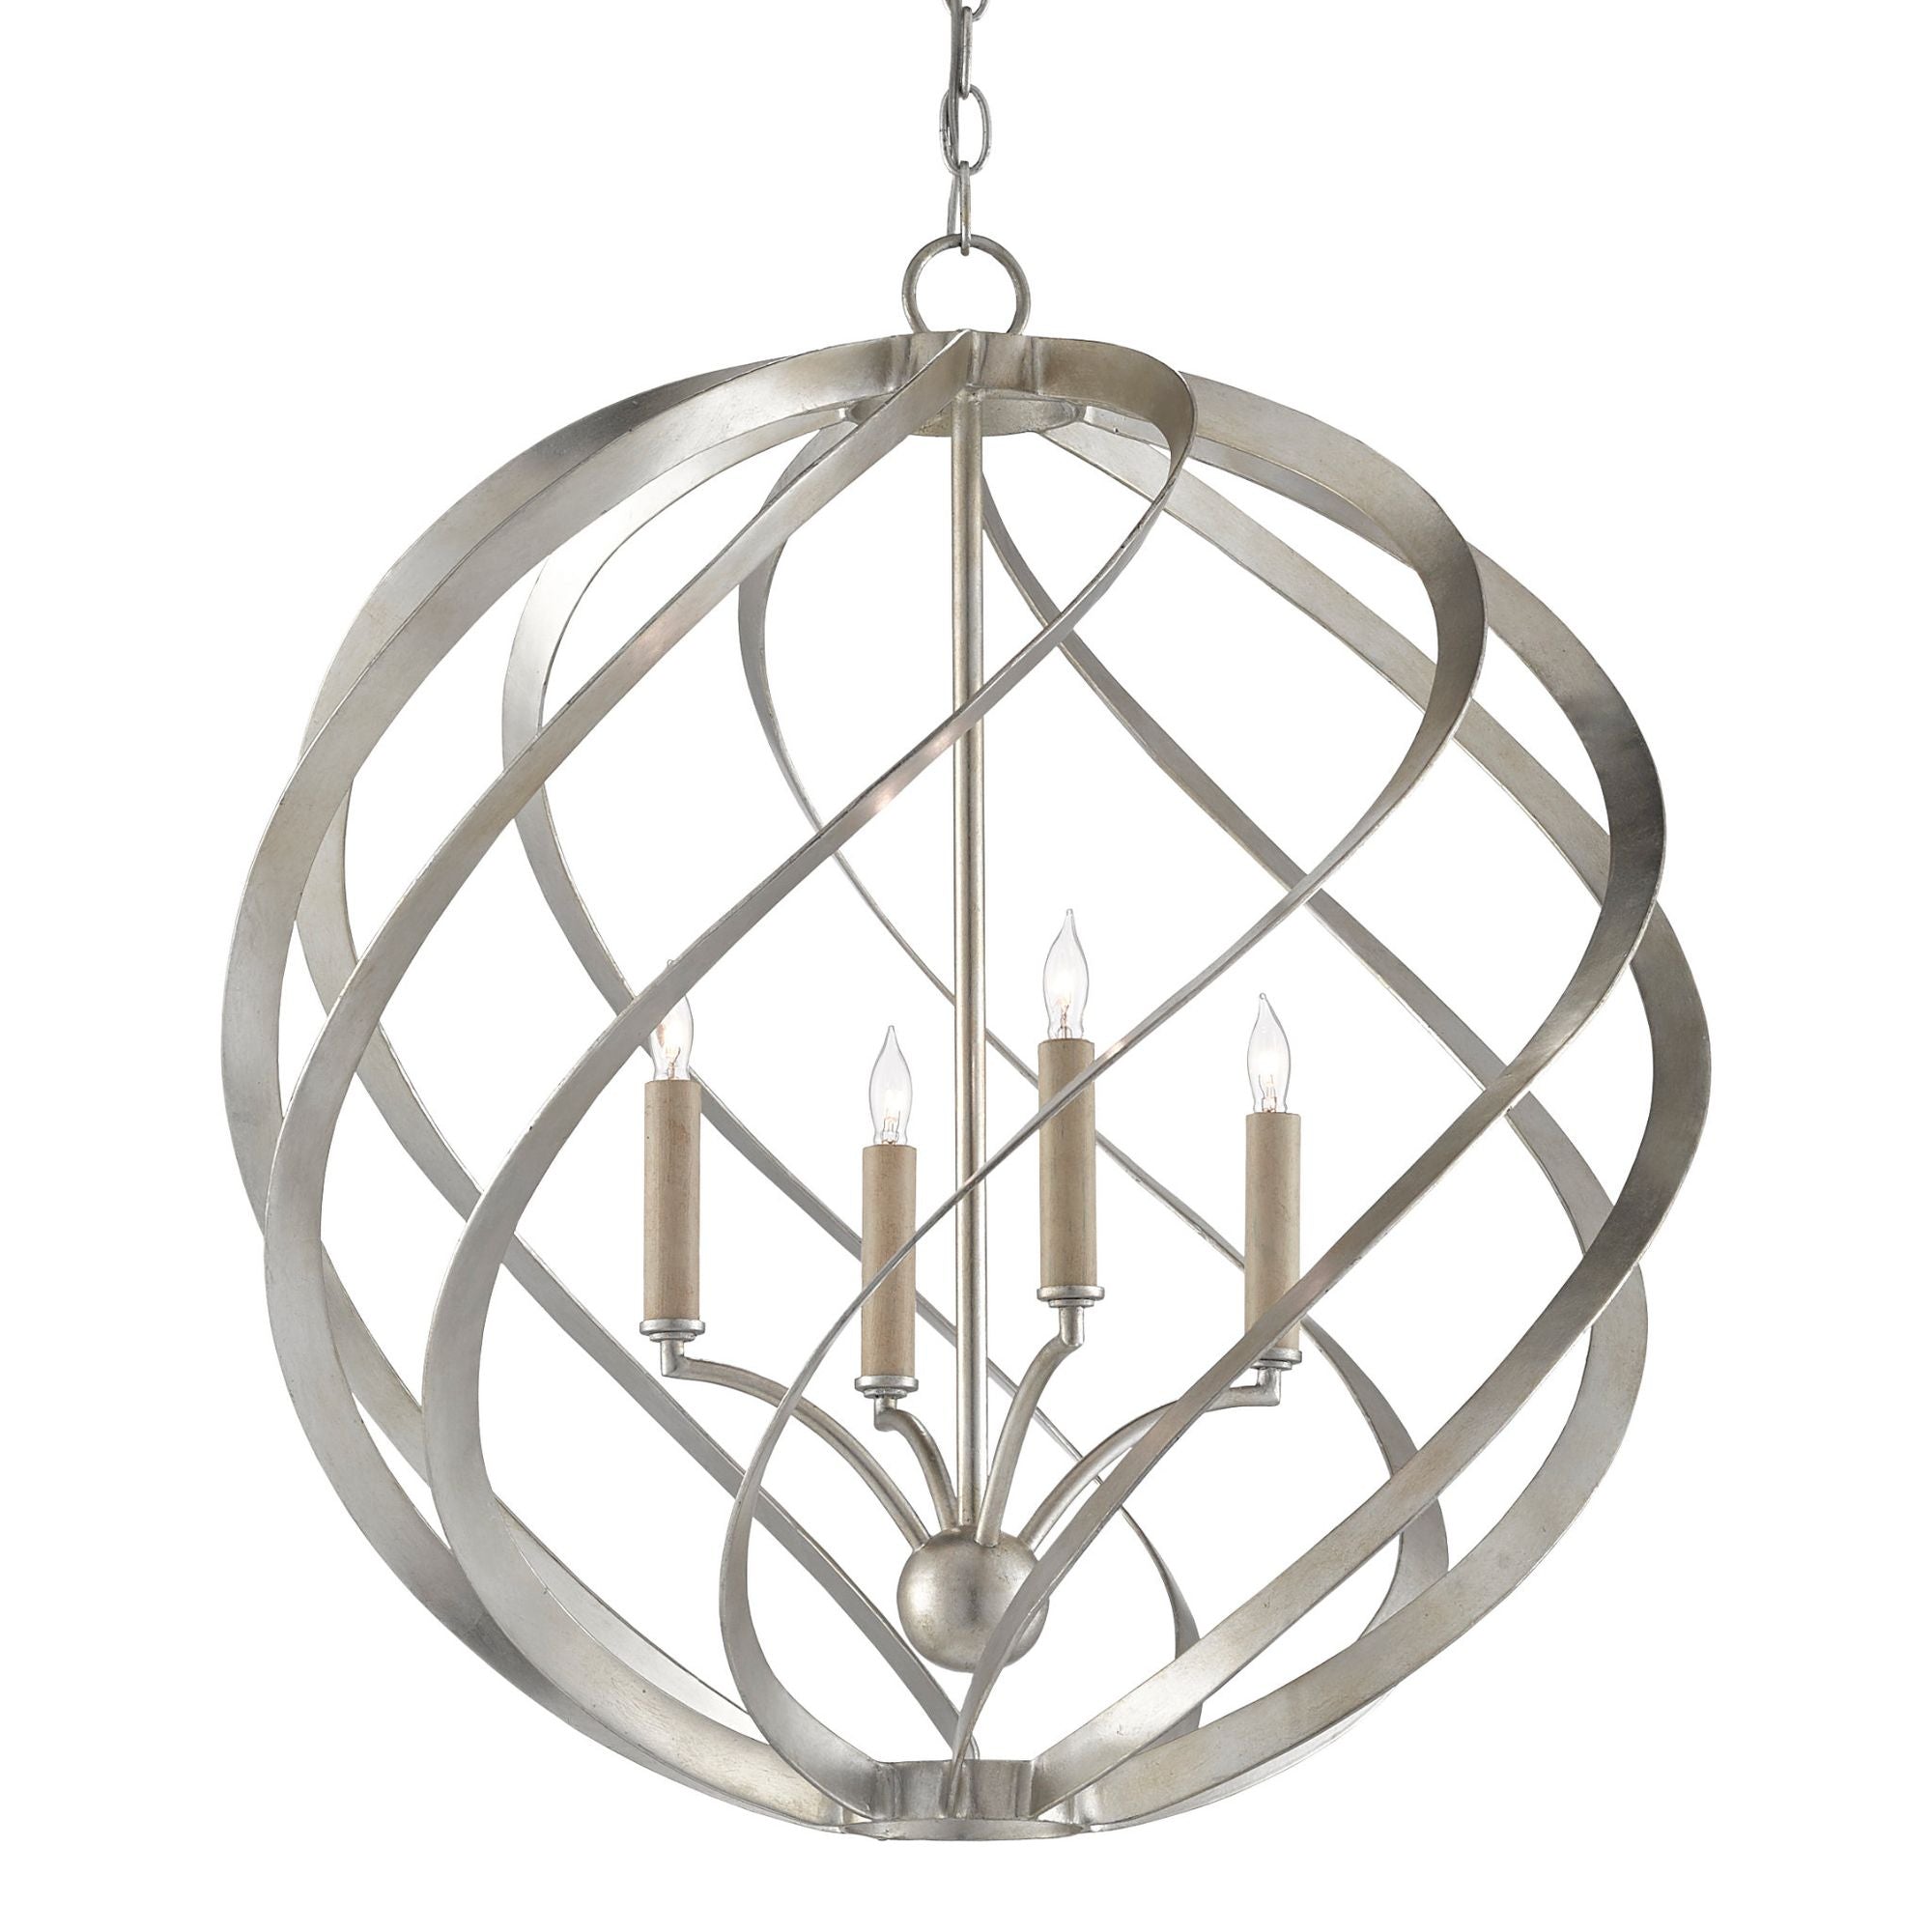 Roussel Silver Orb Chandelier - Contemporary Silver Leaf